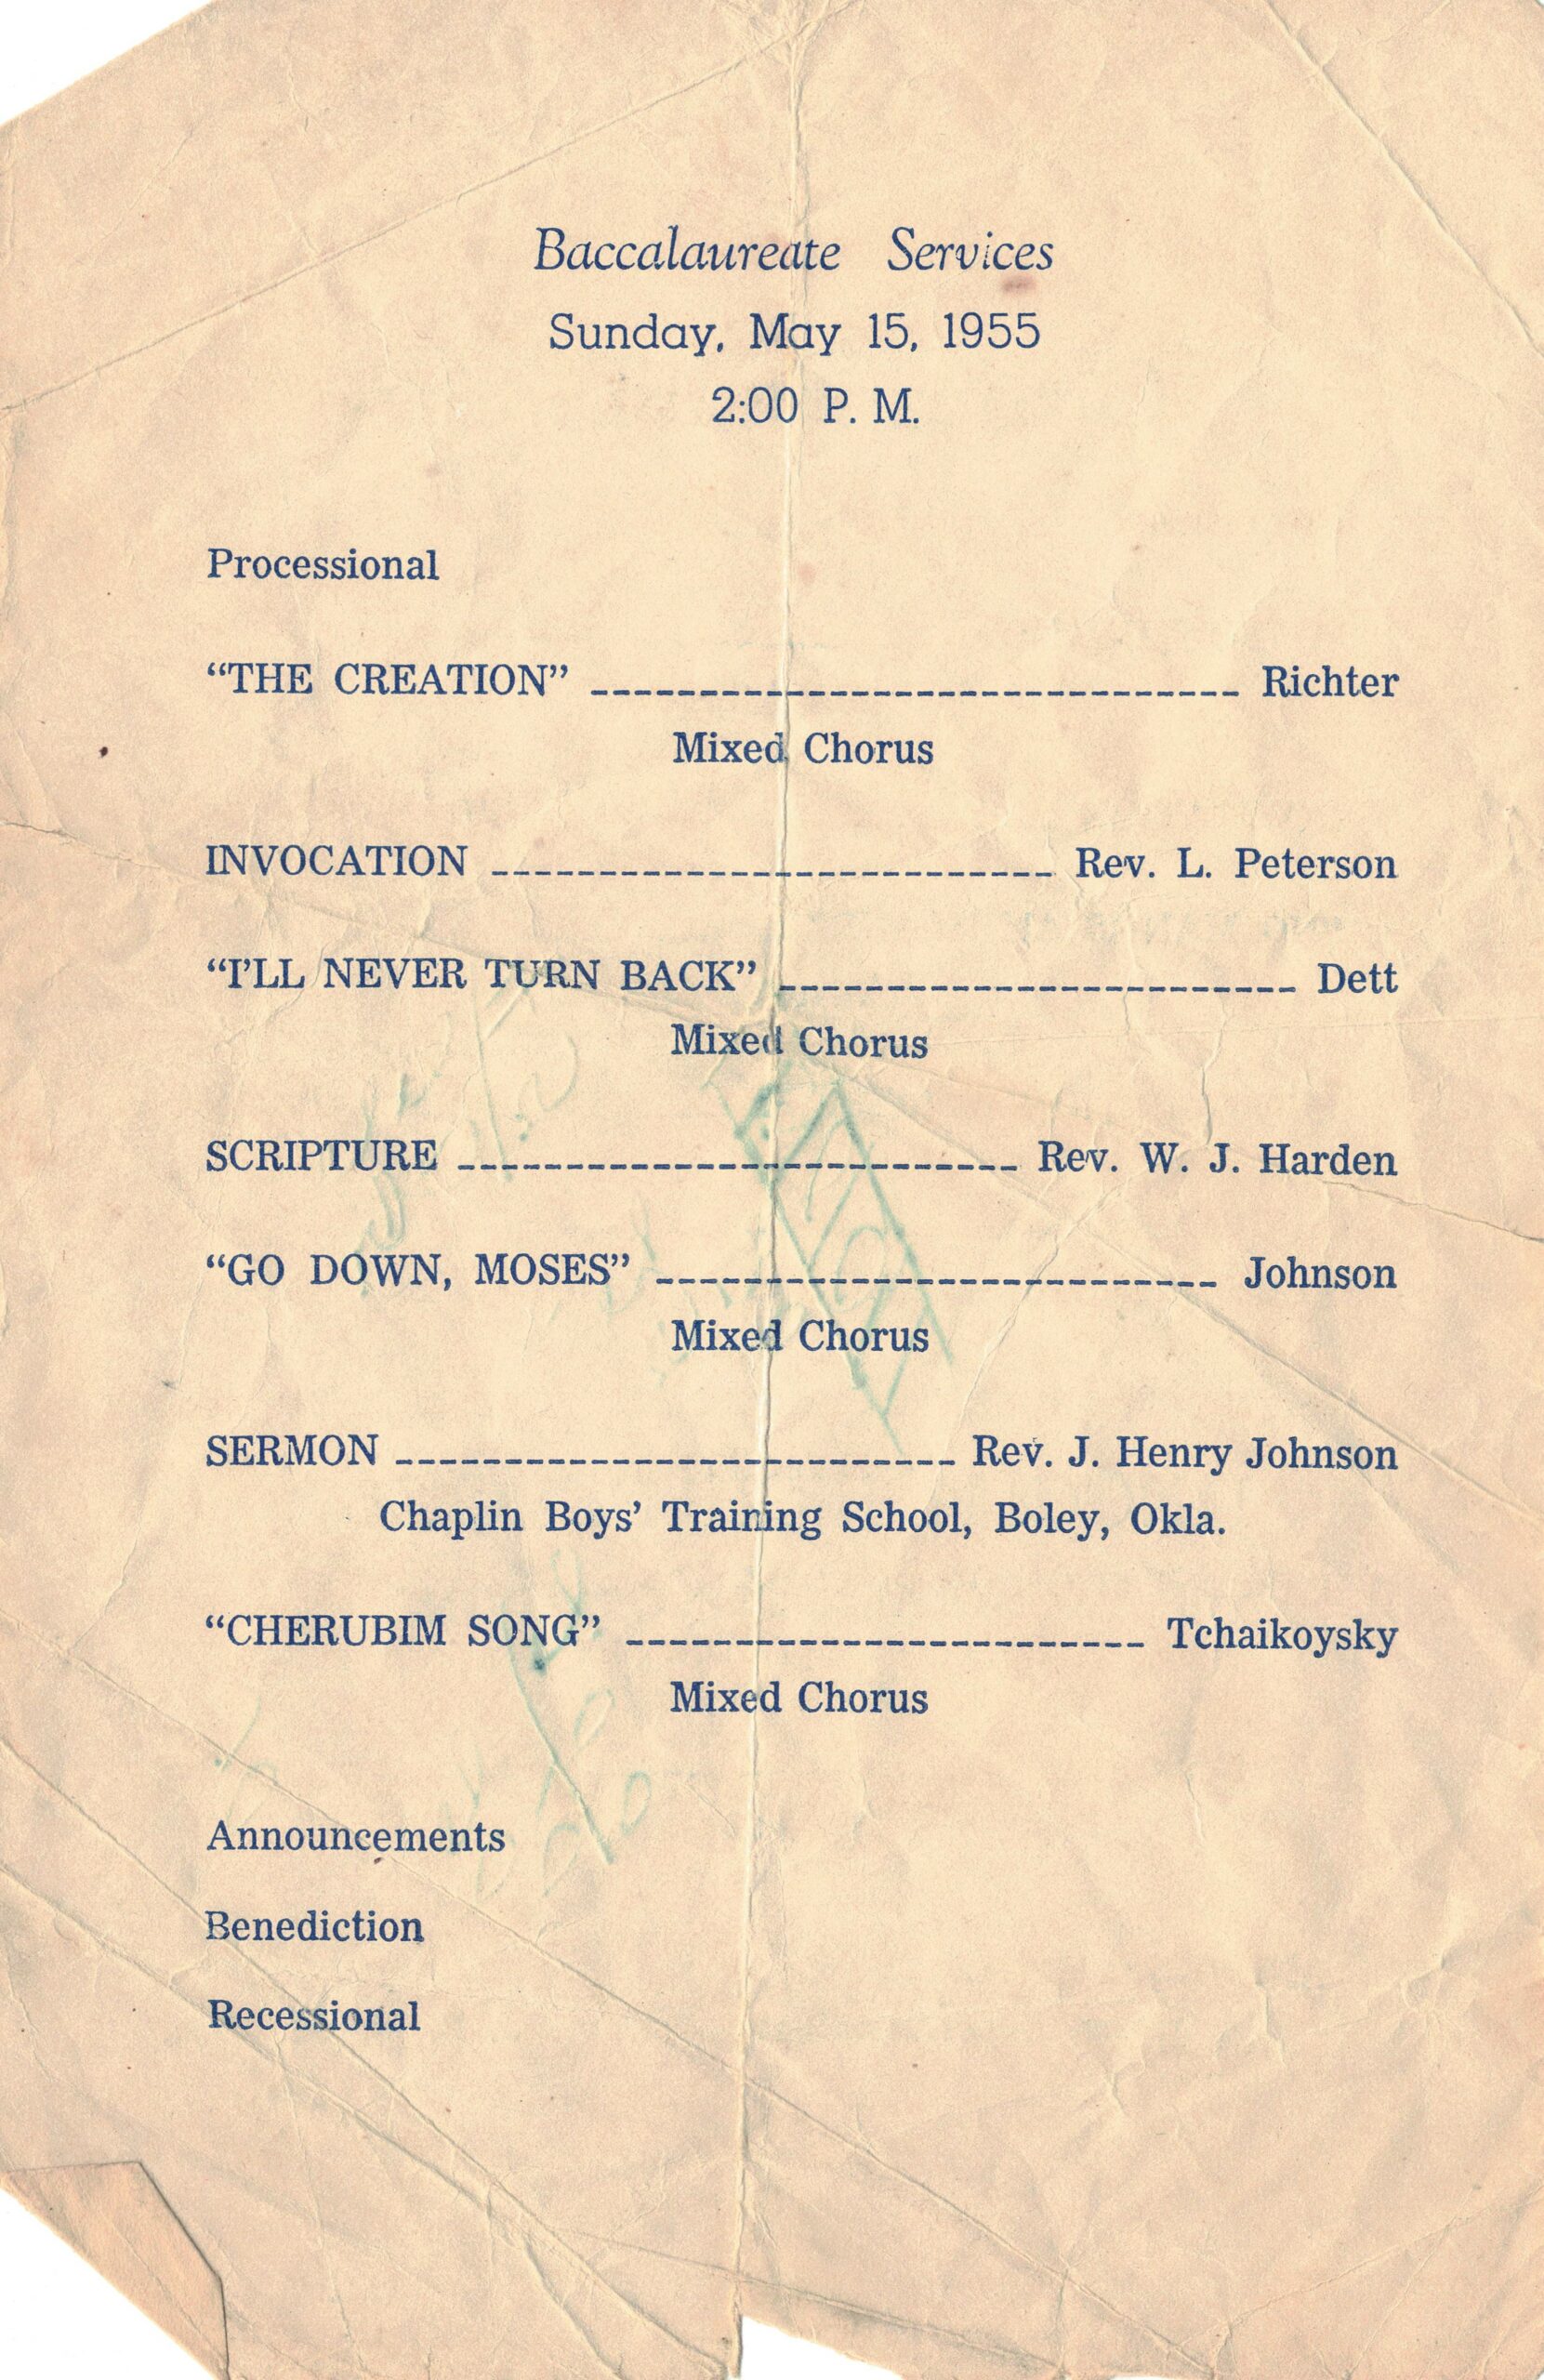 Second page of the 1955 Lincoln graduation program detailing the order of events for the baccalaureate services.